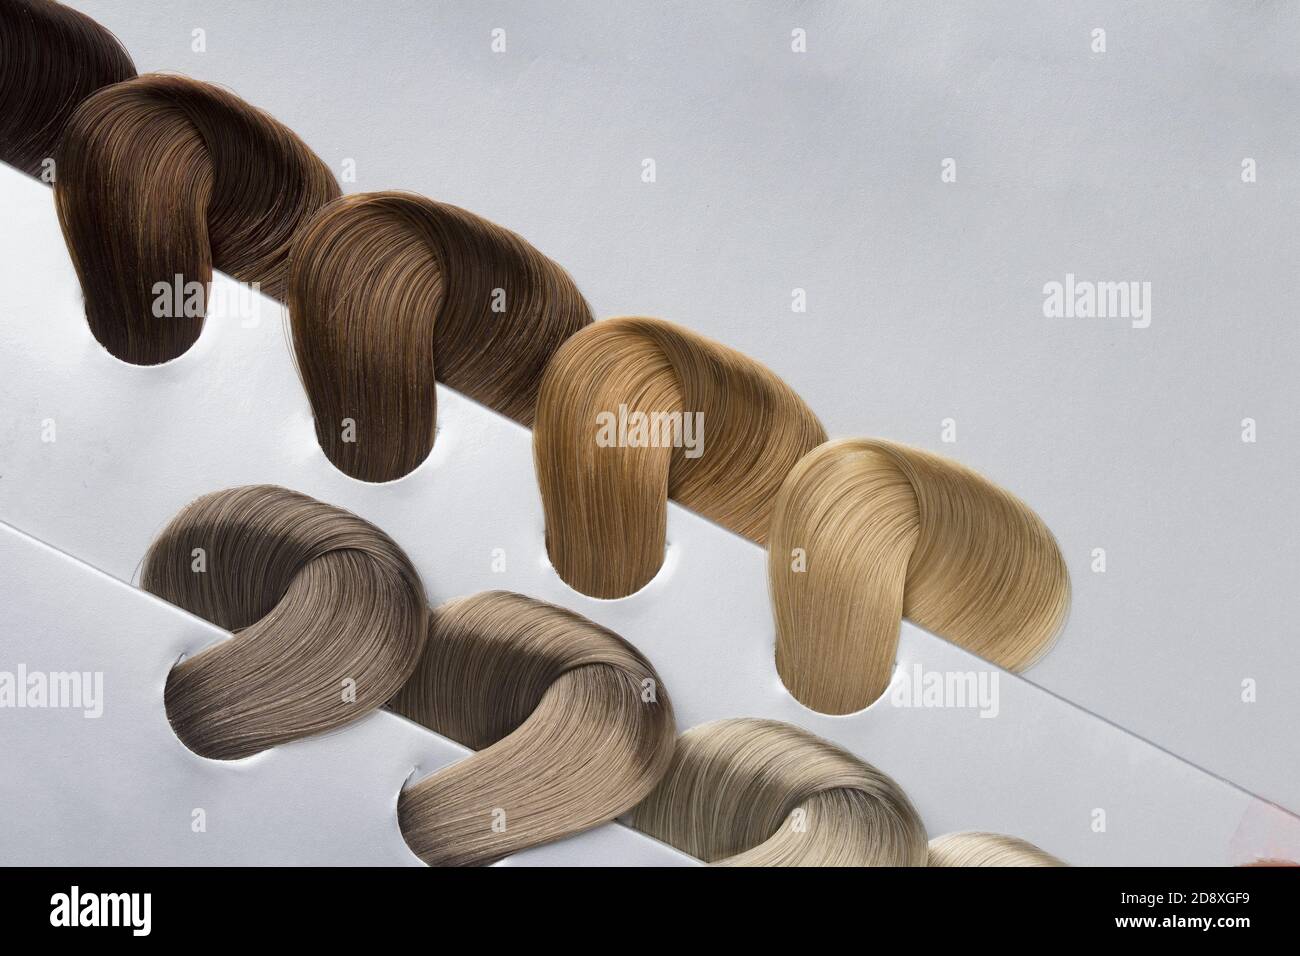 Professional coloring concept . Hair Colors Sample close up Stock Photo